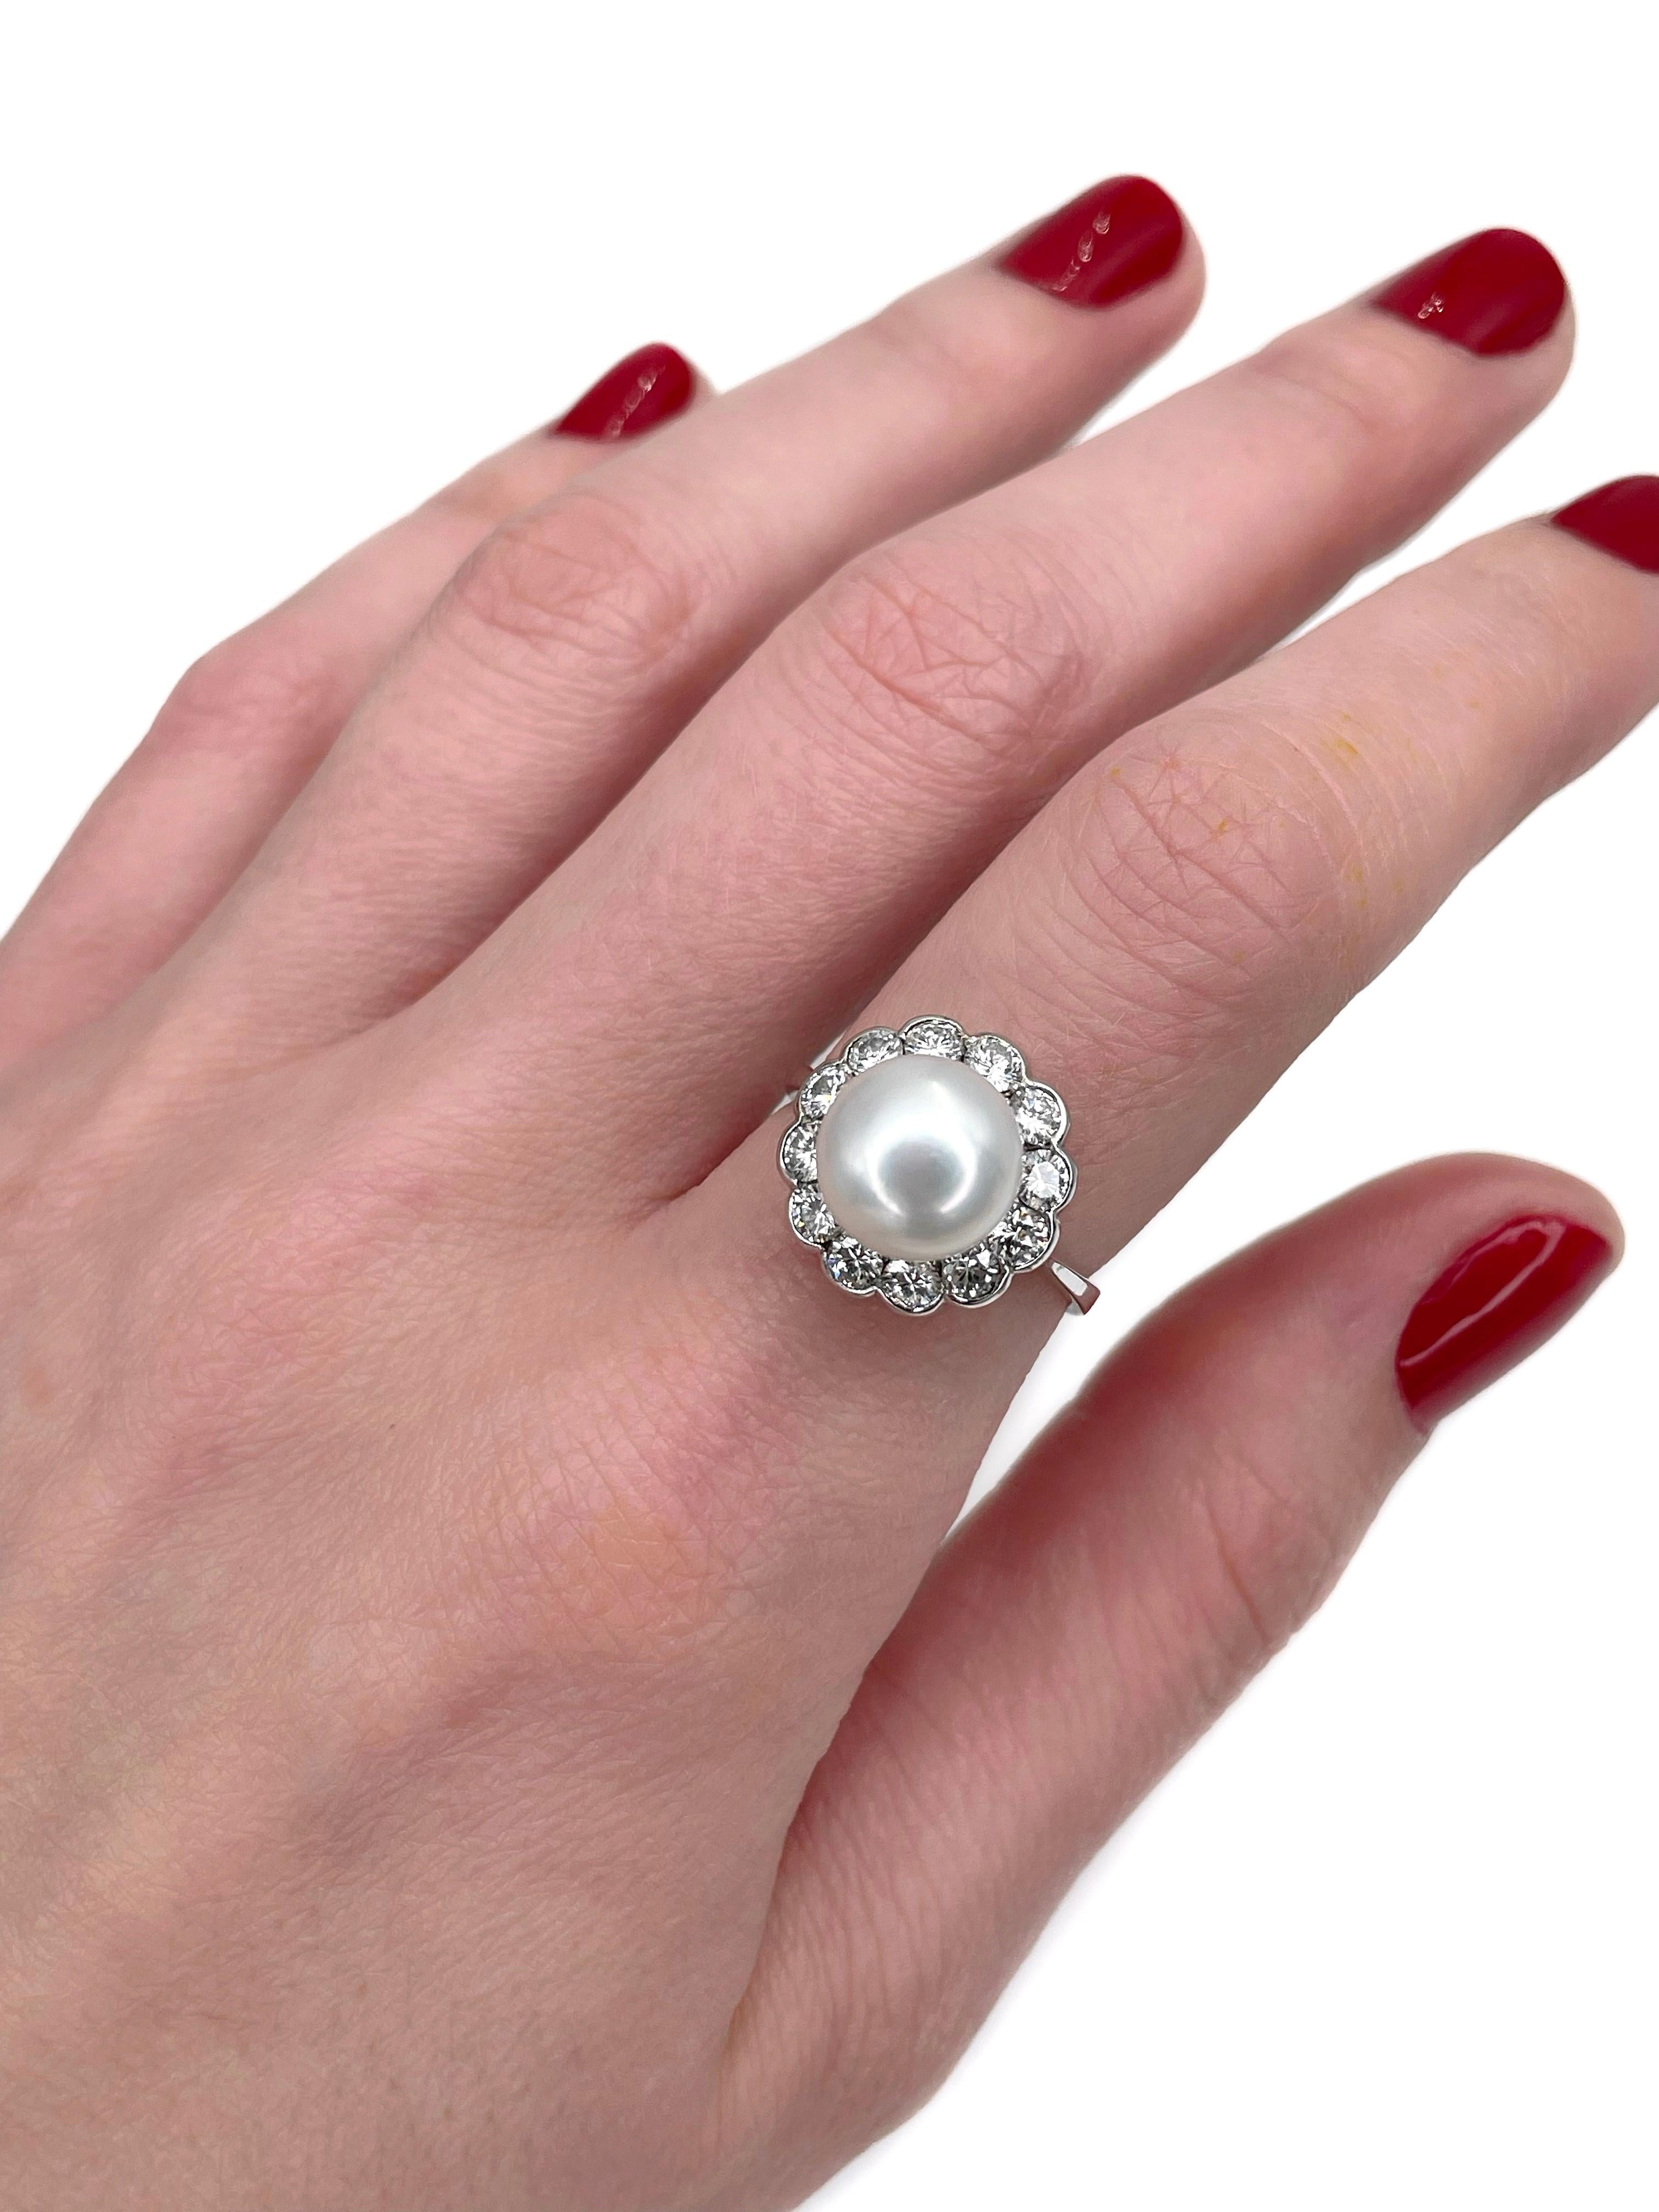 This is a vintage cluster ring crafted in 18K white gold. Circa 1980. 

The piece features:
- 1 cultured pearl
- 12 diamonds (brilliant cut, TW 1.00ct, W-STW, SI)

Weight: 5.14g
Size: 17.25 (US 7)

IMPORTANT: please ask about the possibility to